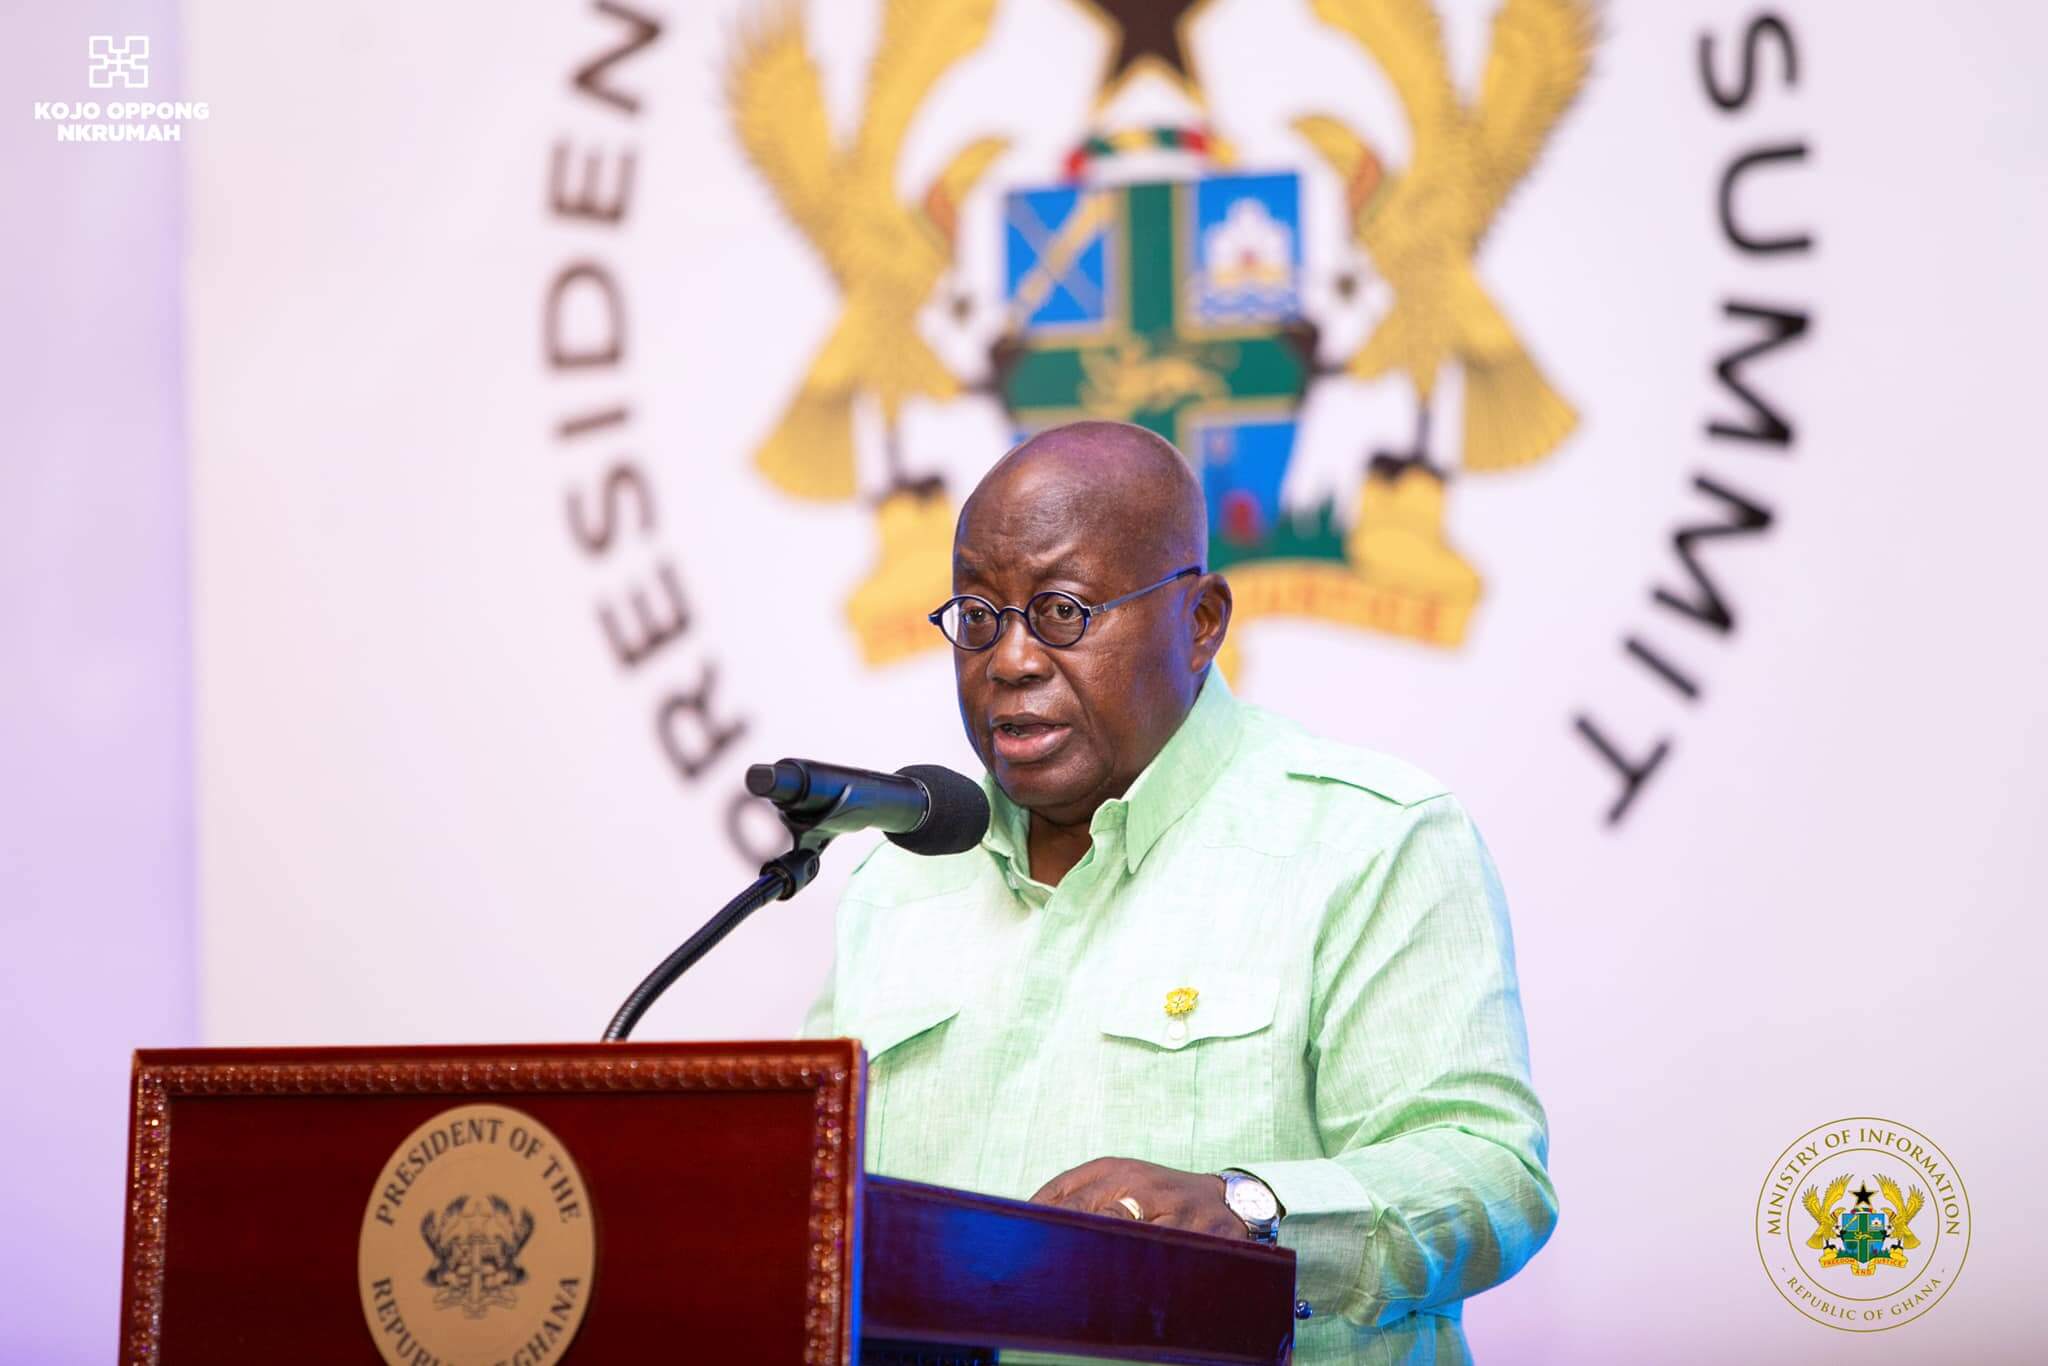 Nana Addo reveals amount spent in education sector since 2017